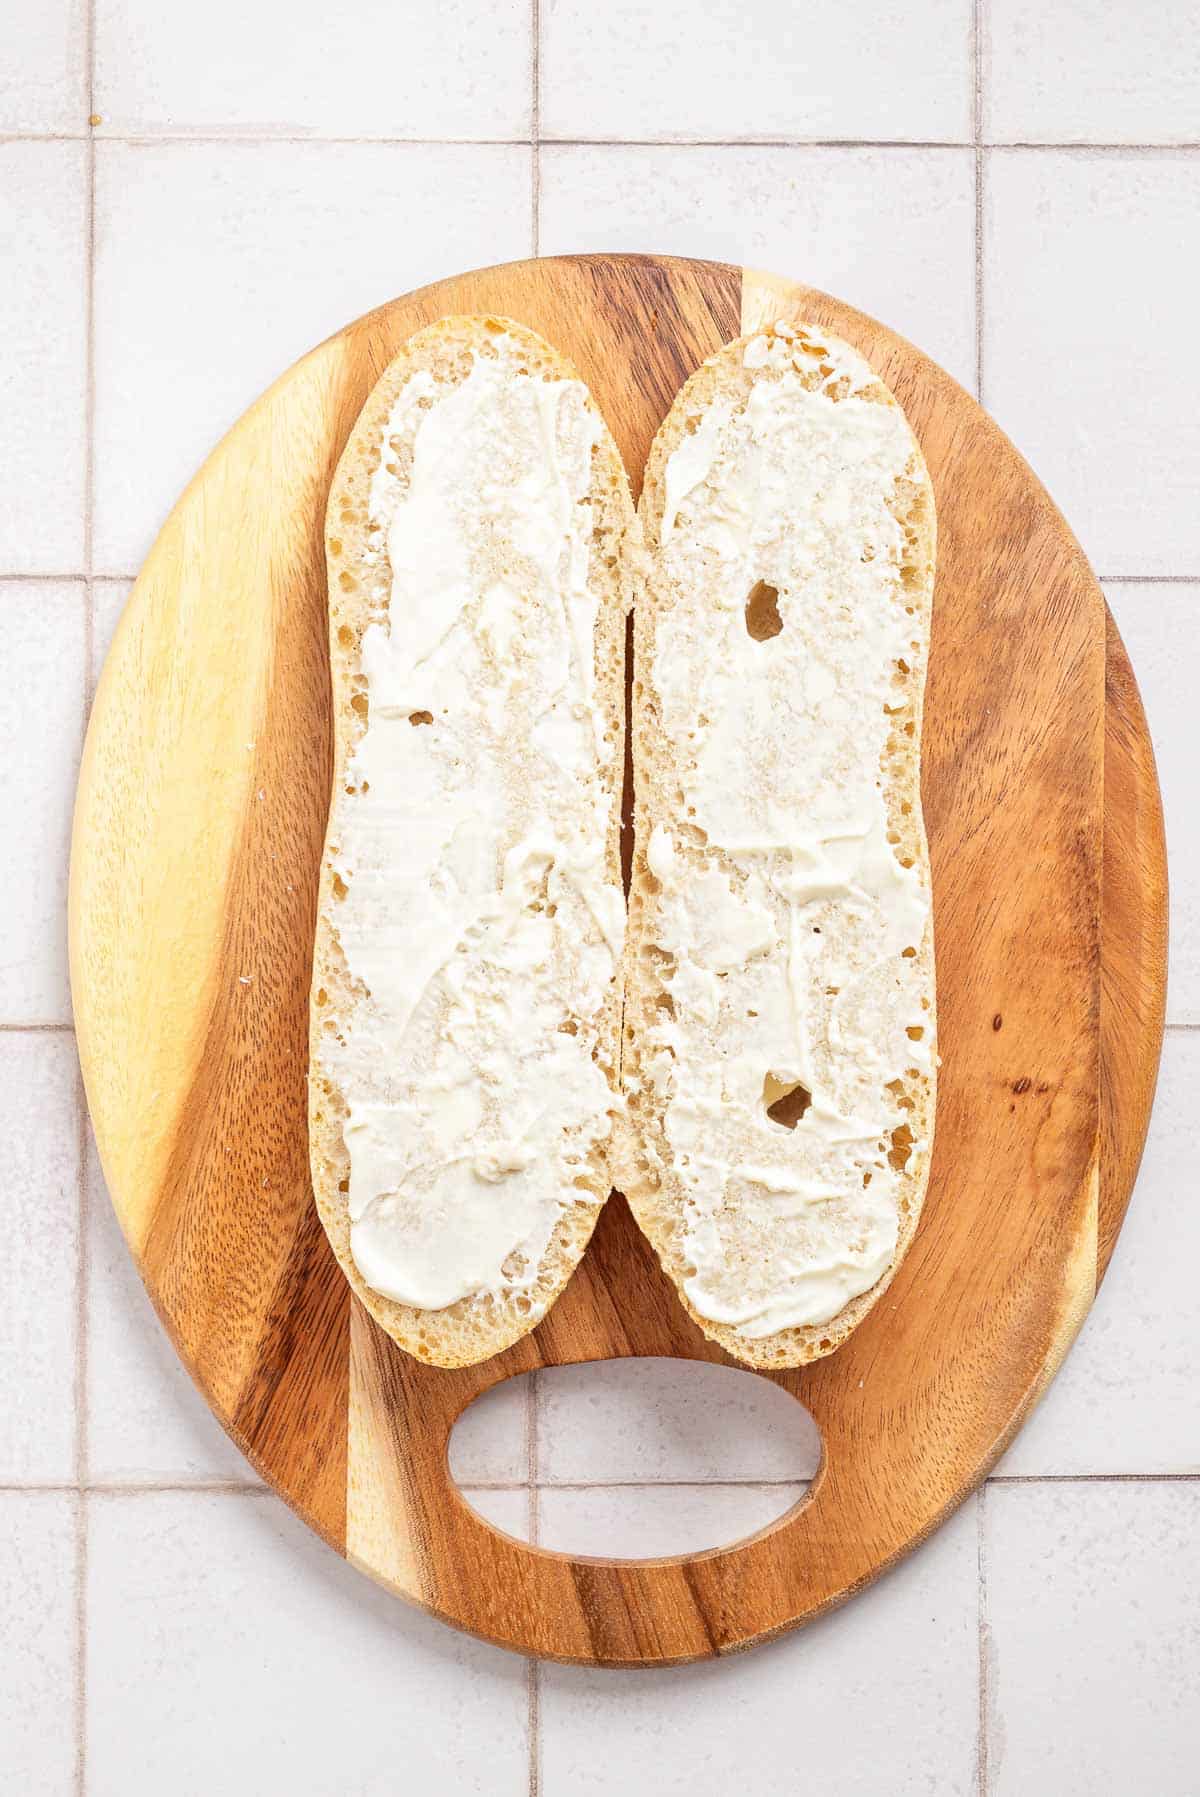 A bread with mayonnaise on a wooden board.